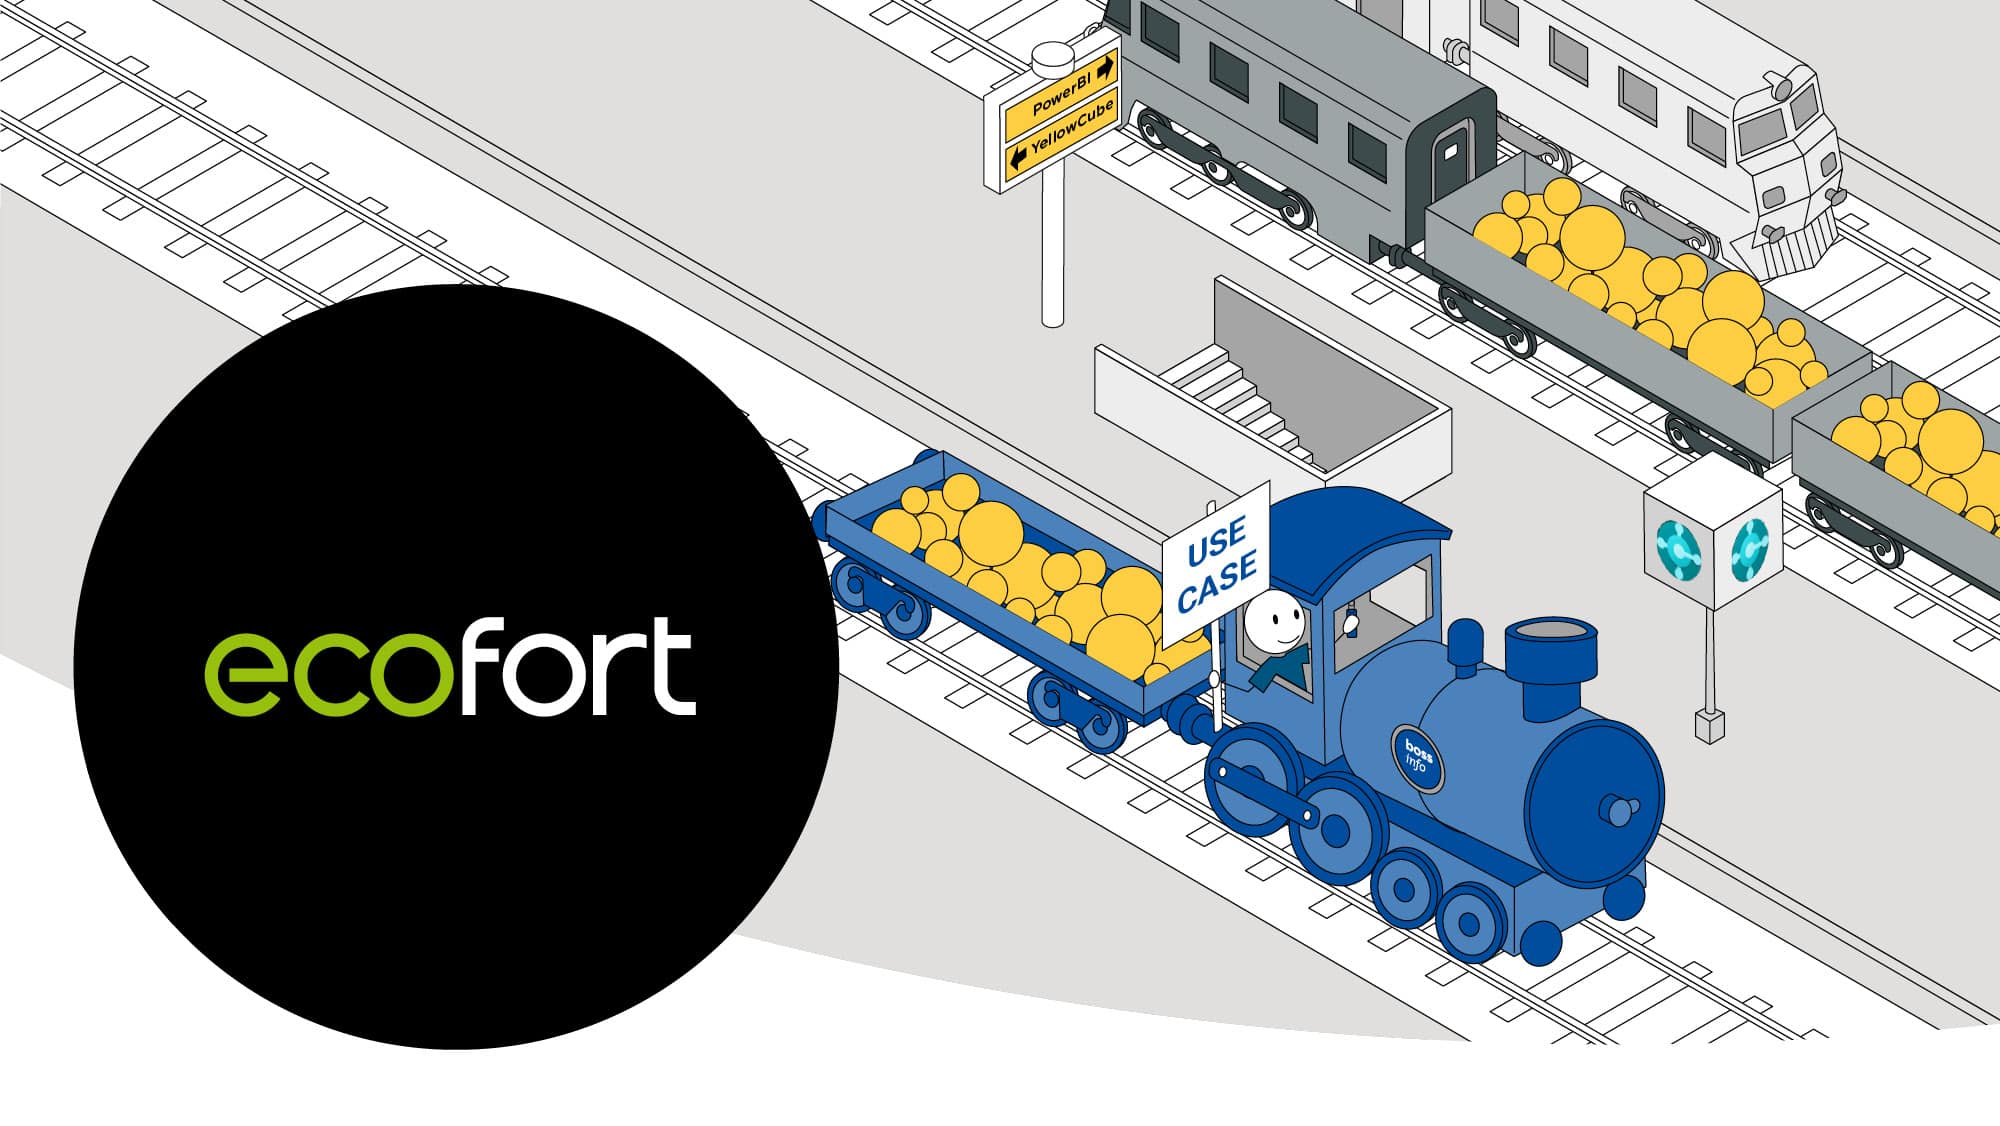 ecofort sets the course for the future with Microsoft Dynamics 365 BC